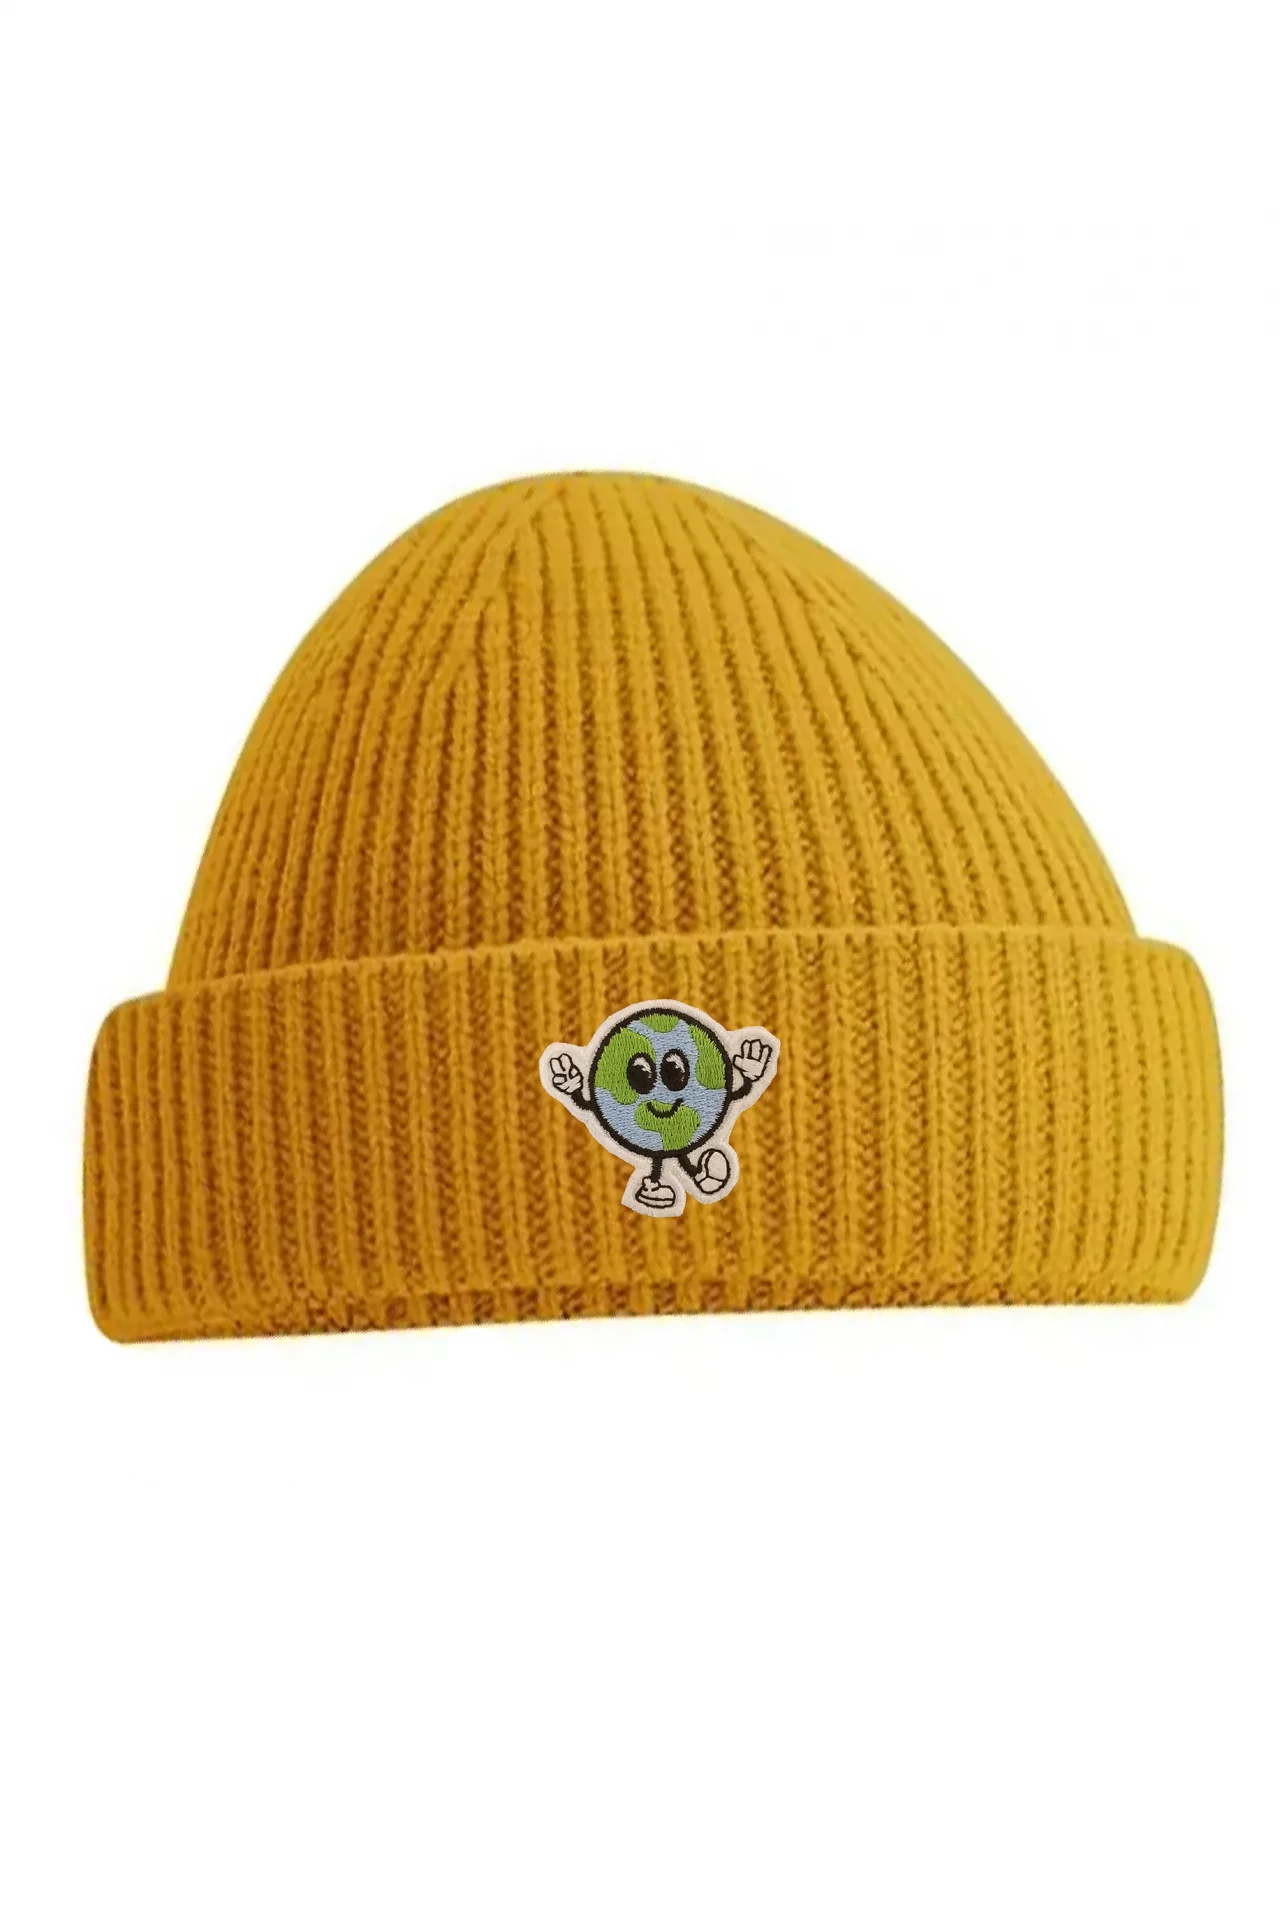 Yellow beanie with a world illustration embroided